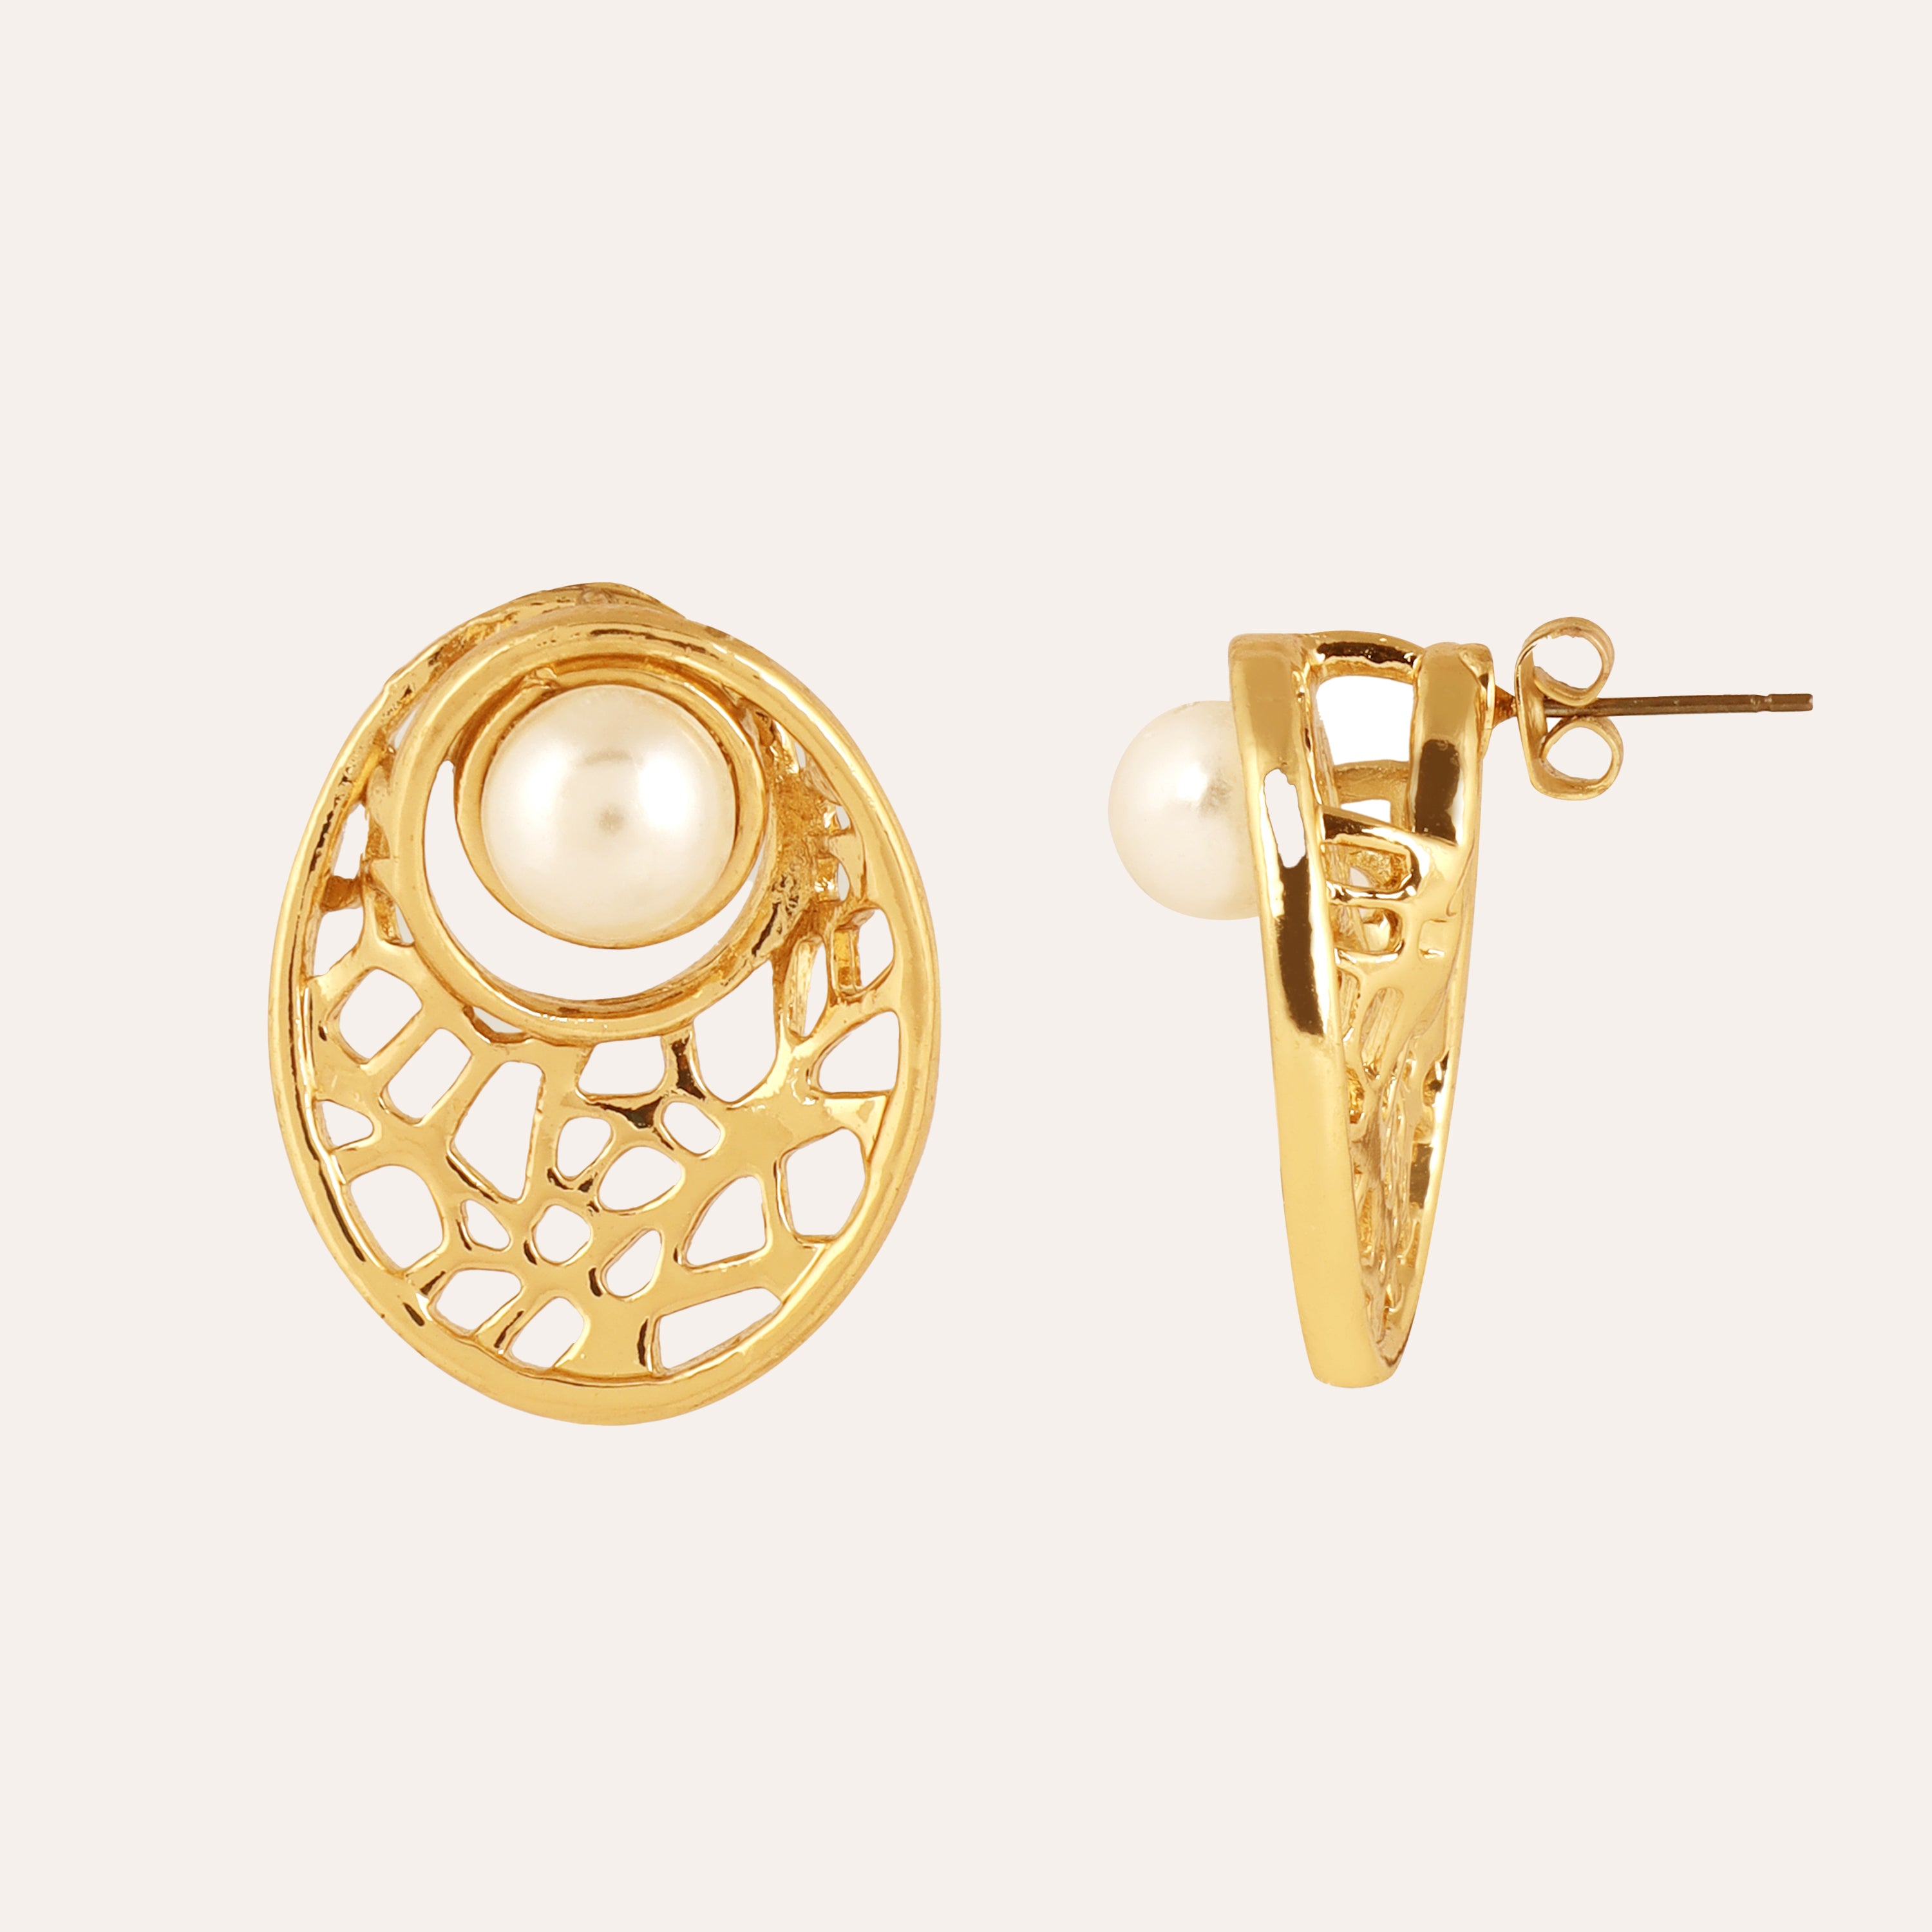 TFC Pearl Fantasia gold plated stud earrings-Discover daily wear gold earrings including stud earrings, hoop earrings, and pearl earrings, perfect as earrings for women and earrings for girls.Find the cheapest fashion jewellery which is anti-tarnis​h only at The Fun company.